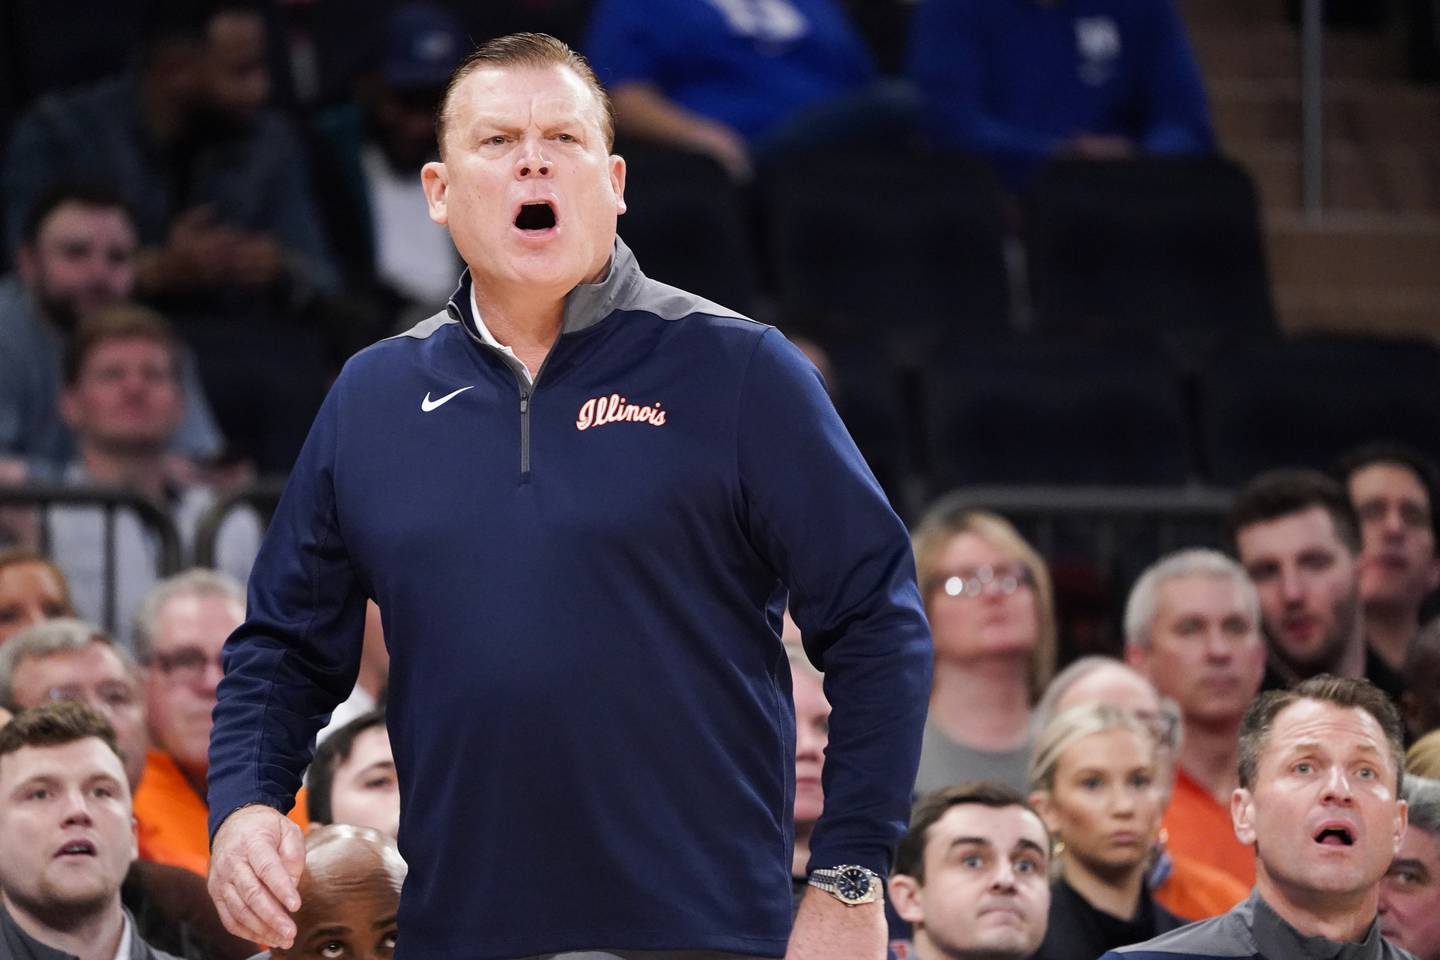 Illinois coach Brad Underwood works the bench during the first half of the Jimmy V Classic on Tuesday, Dec. 6, 2022, in New York.